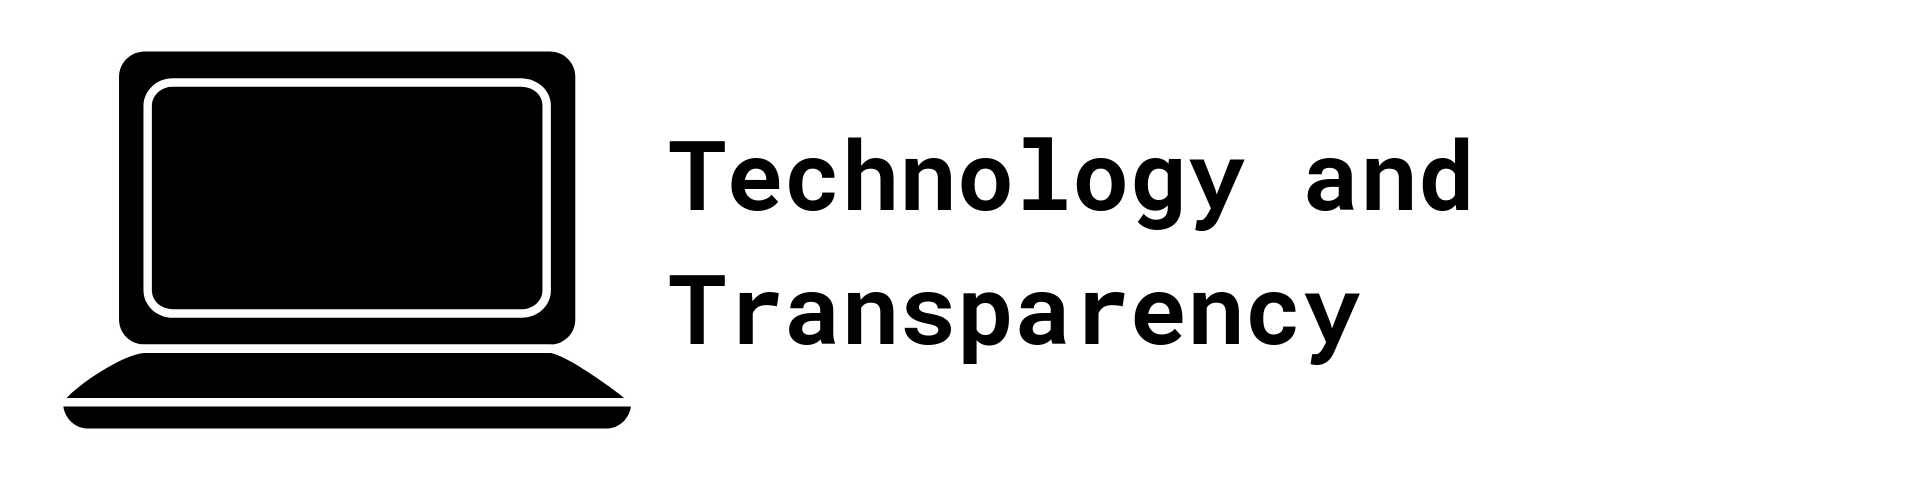 Technology Graphic